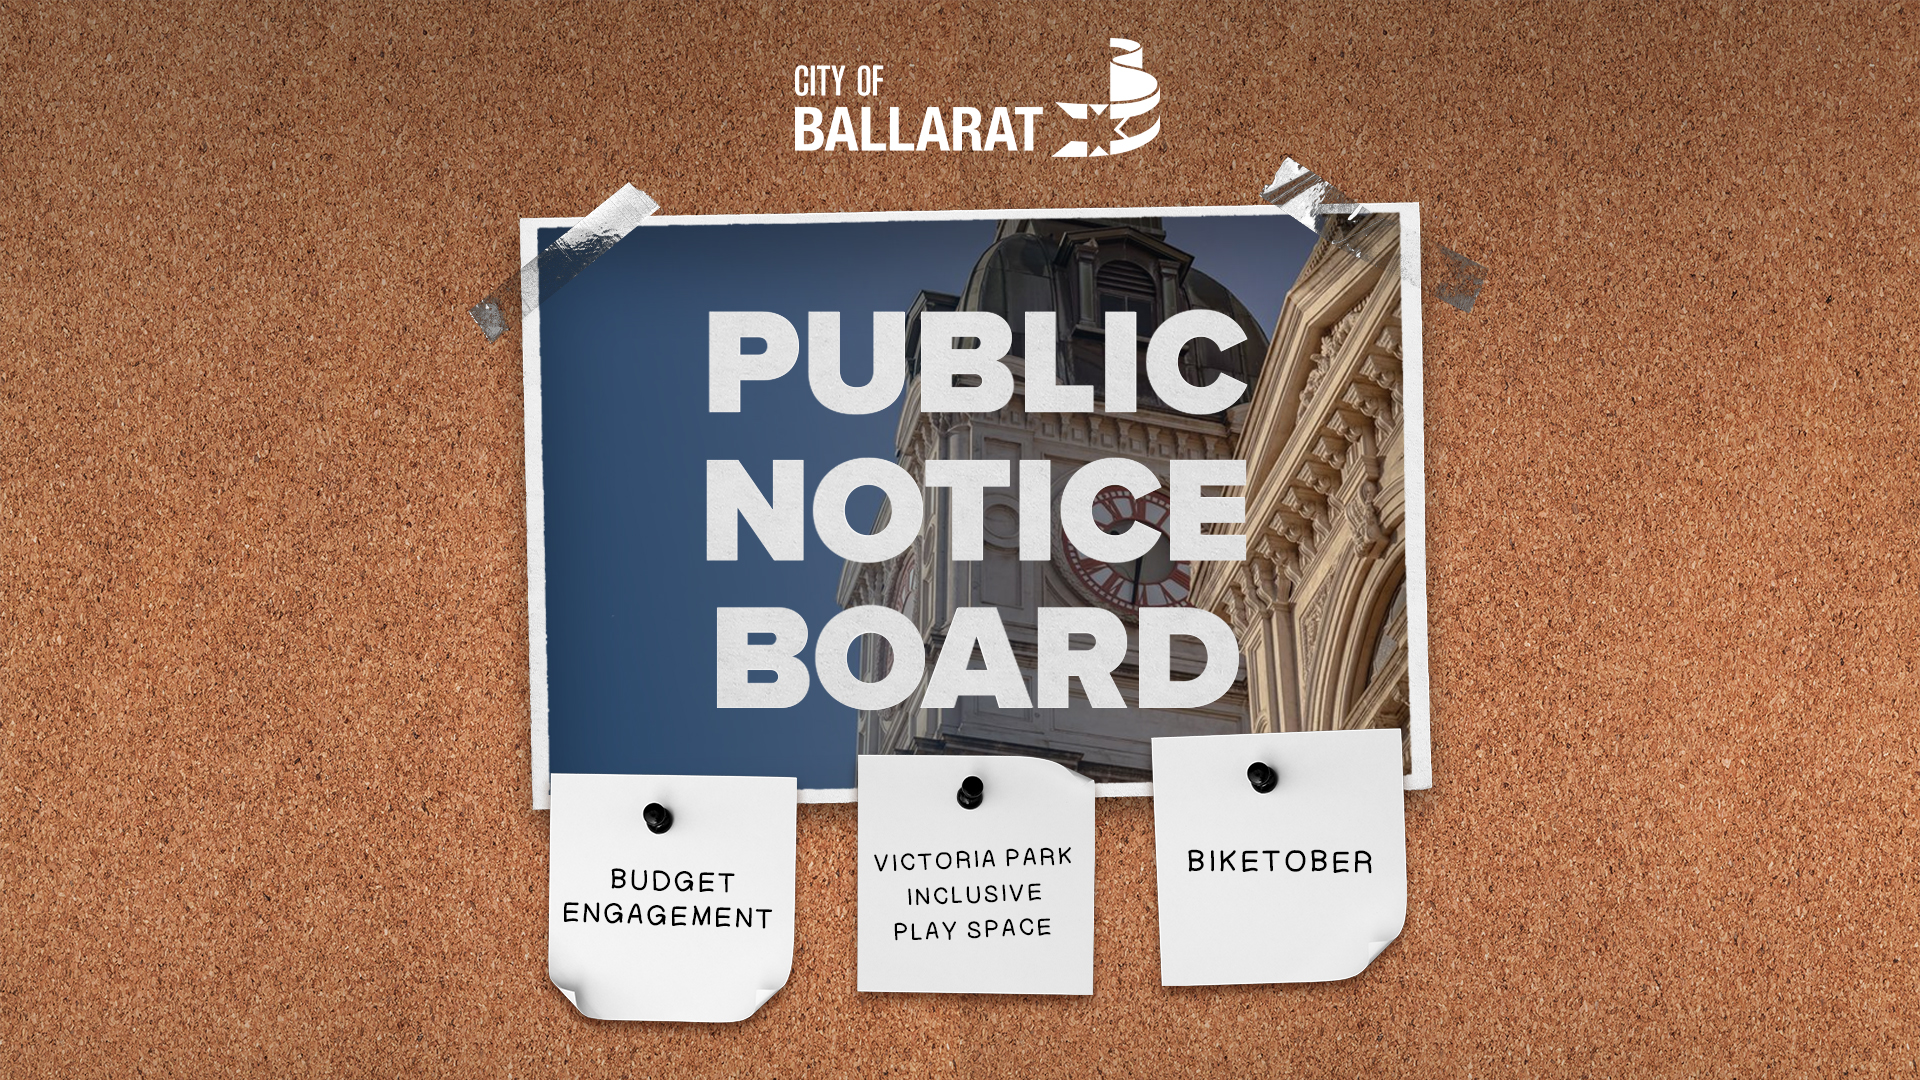 Notice board with Public Notice Board text over an image of Ballarat Town Hall. Three notes underneath with text saying BUDGET ENGAGEMENT, VICTORIA PARK INCLUSIVE PLAY SPACE, BIKETOBER